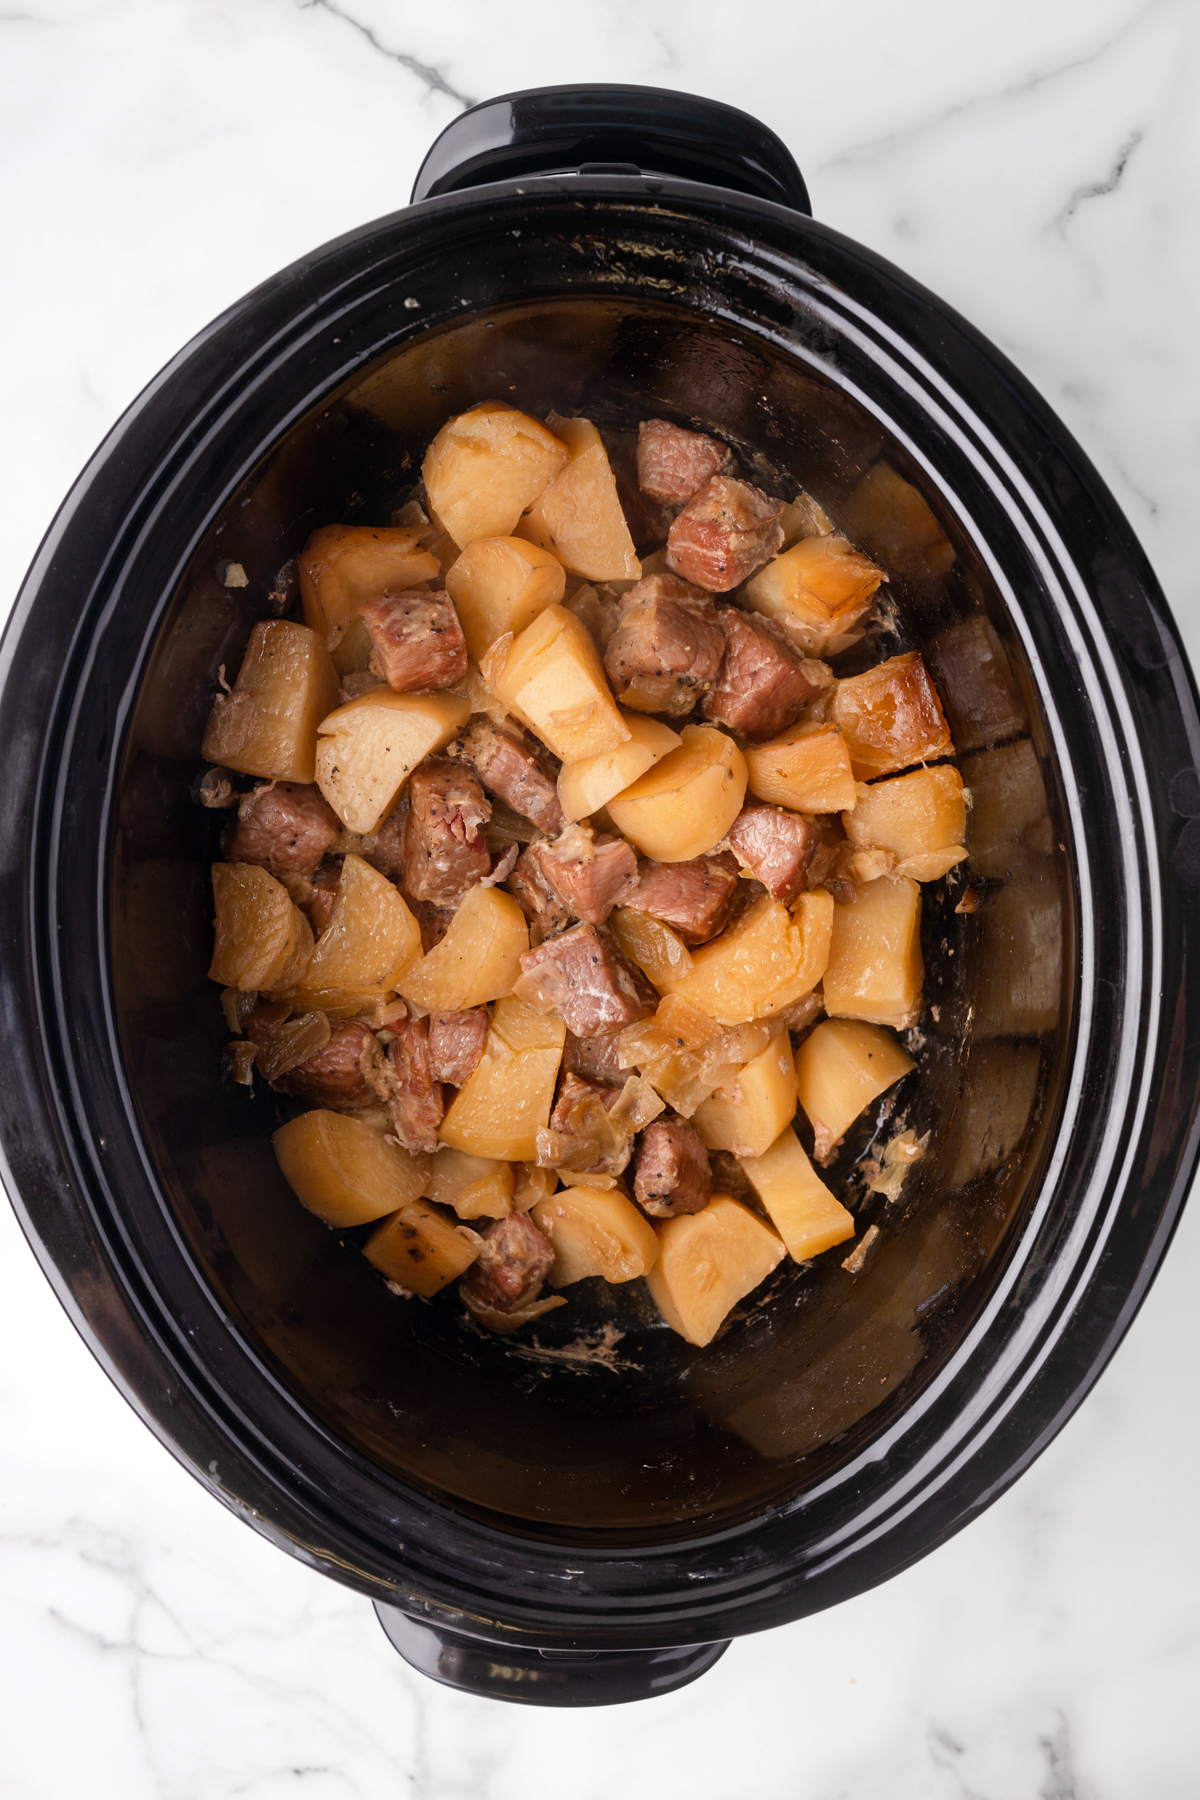 Corned beef and potatoes in a slow cooker.